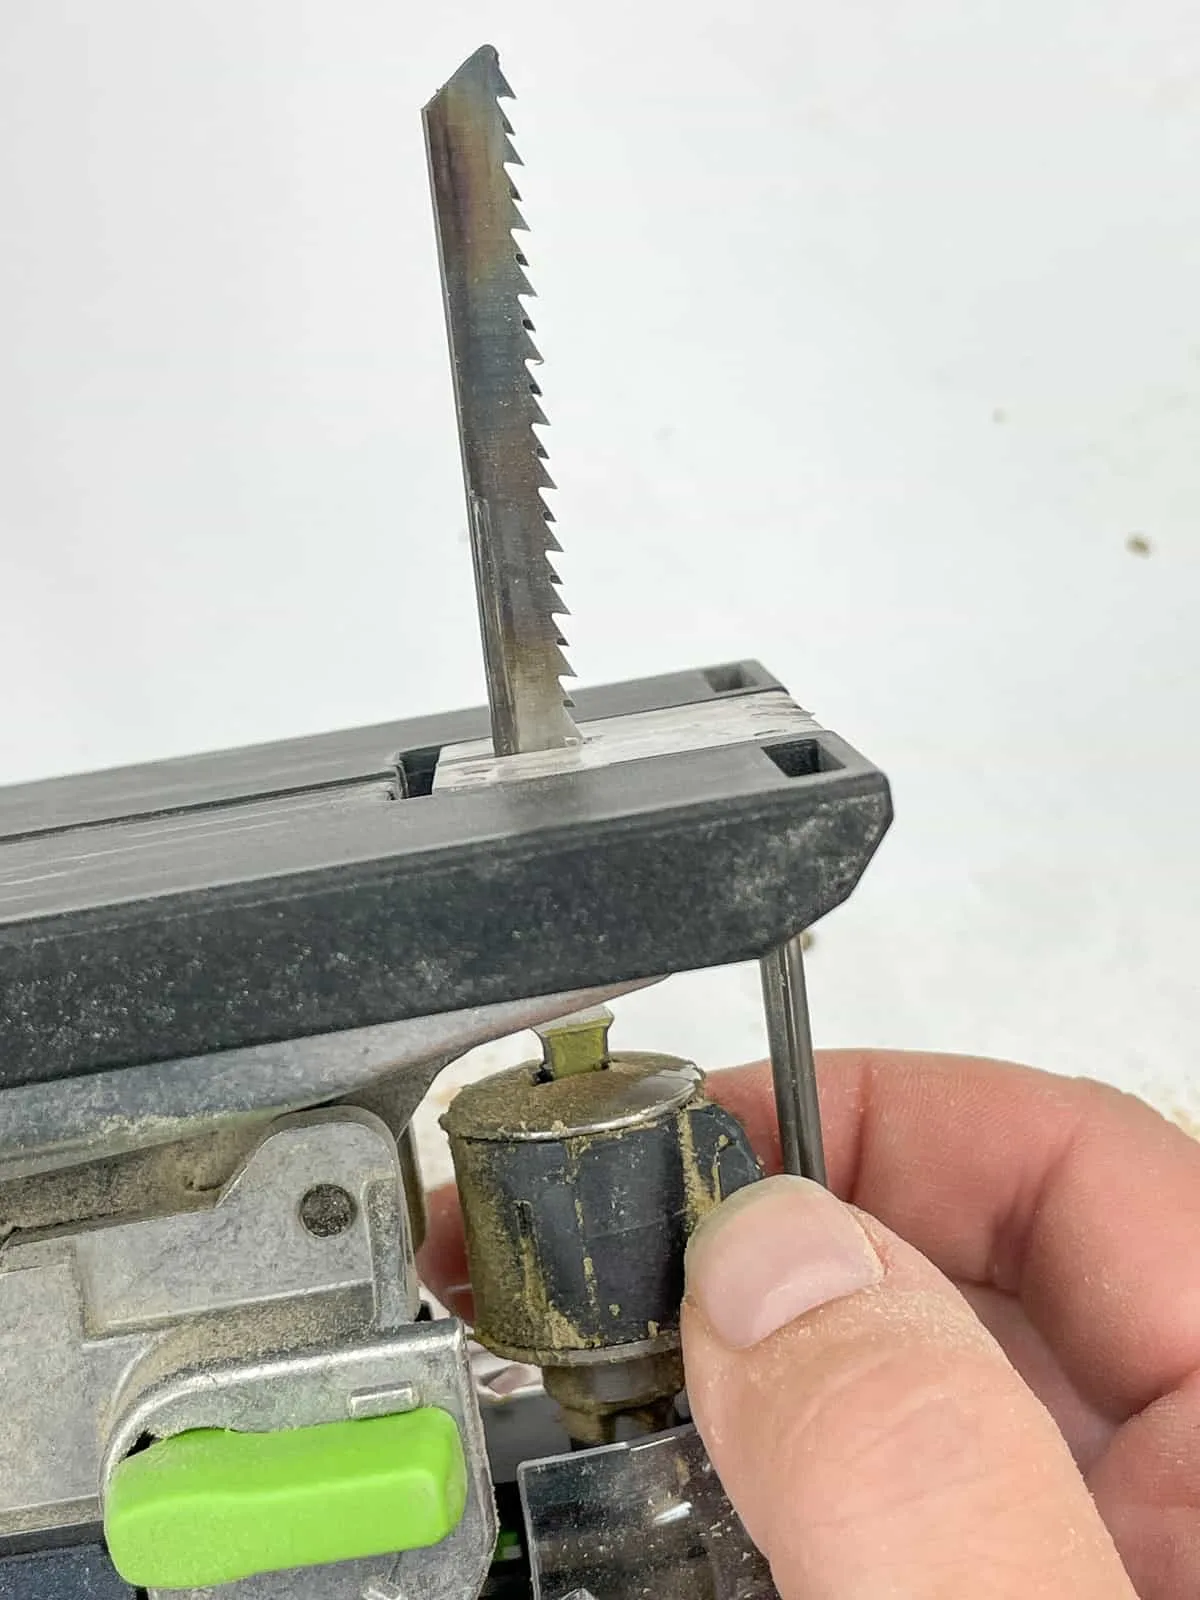 insert the jigsaw blade by twisting the blade clamp lock